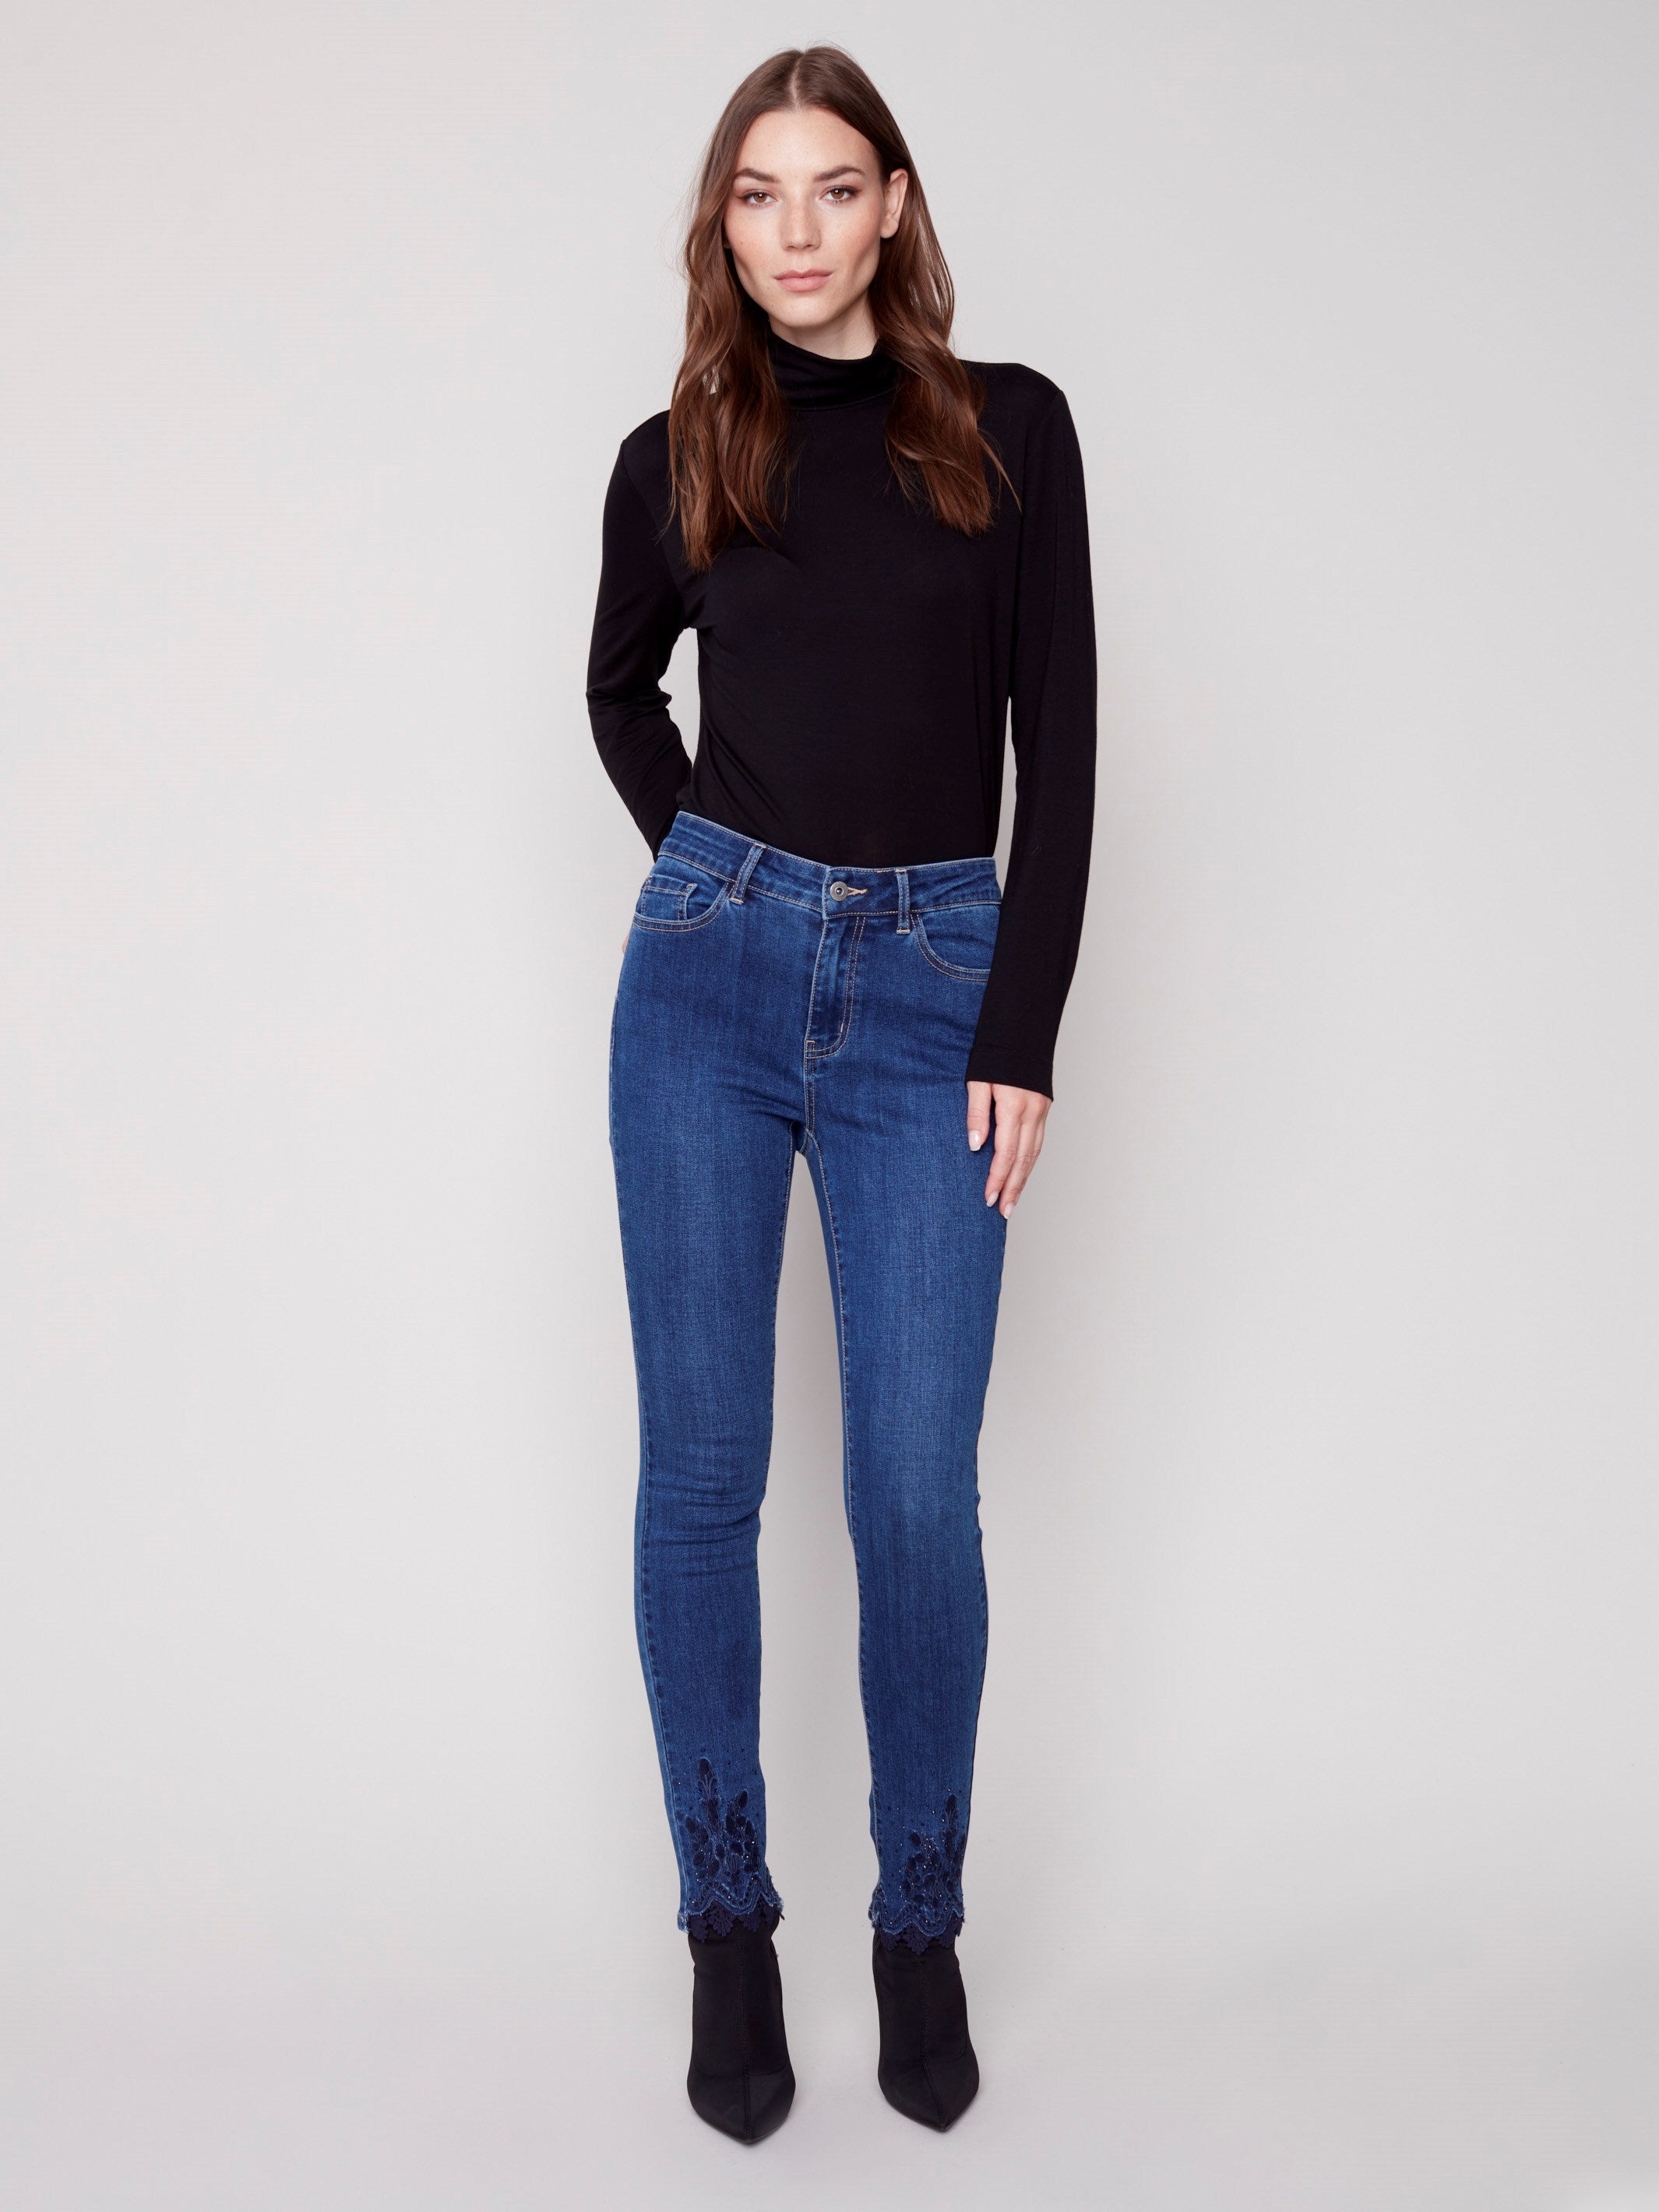 Skinny Jeans with Embroidered Scalloped Hem - Blue Jean